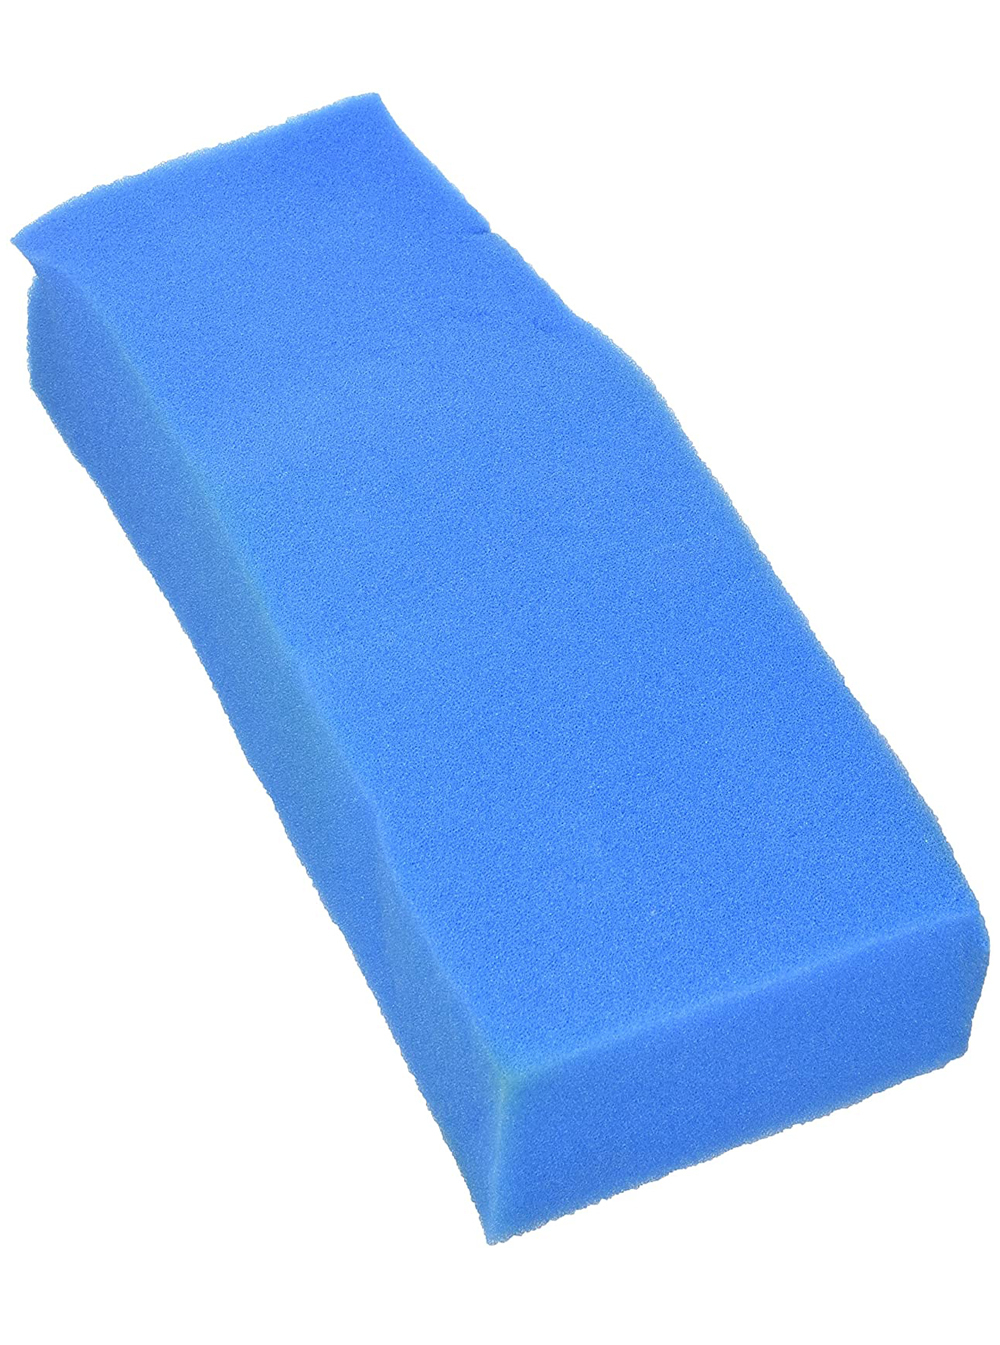 RCI 7050A - Fuel Cell Safety Foam, 3 x 6 x 16 in, Each